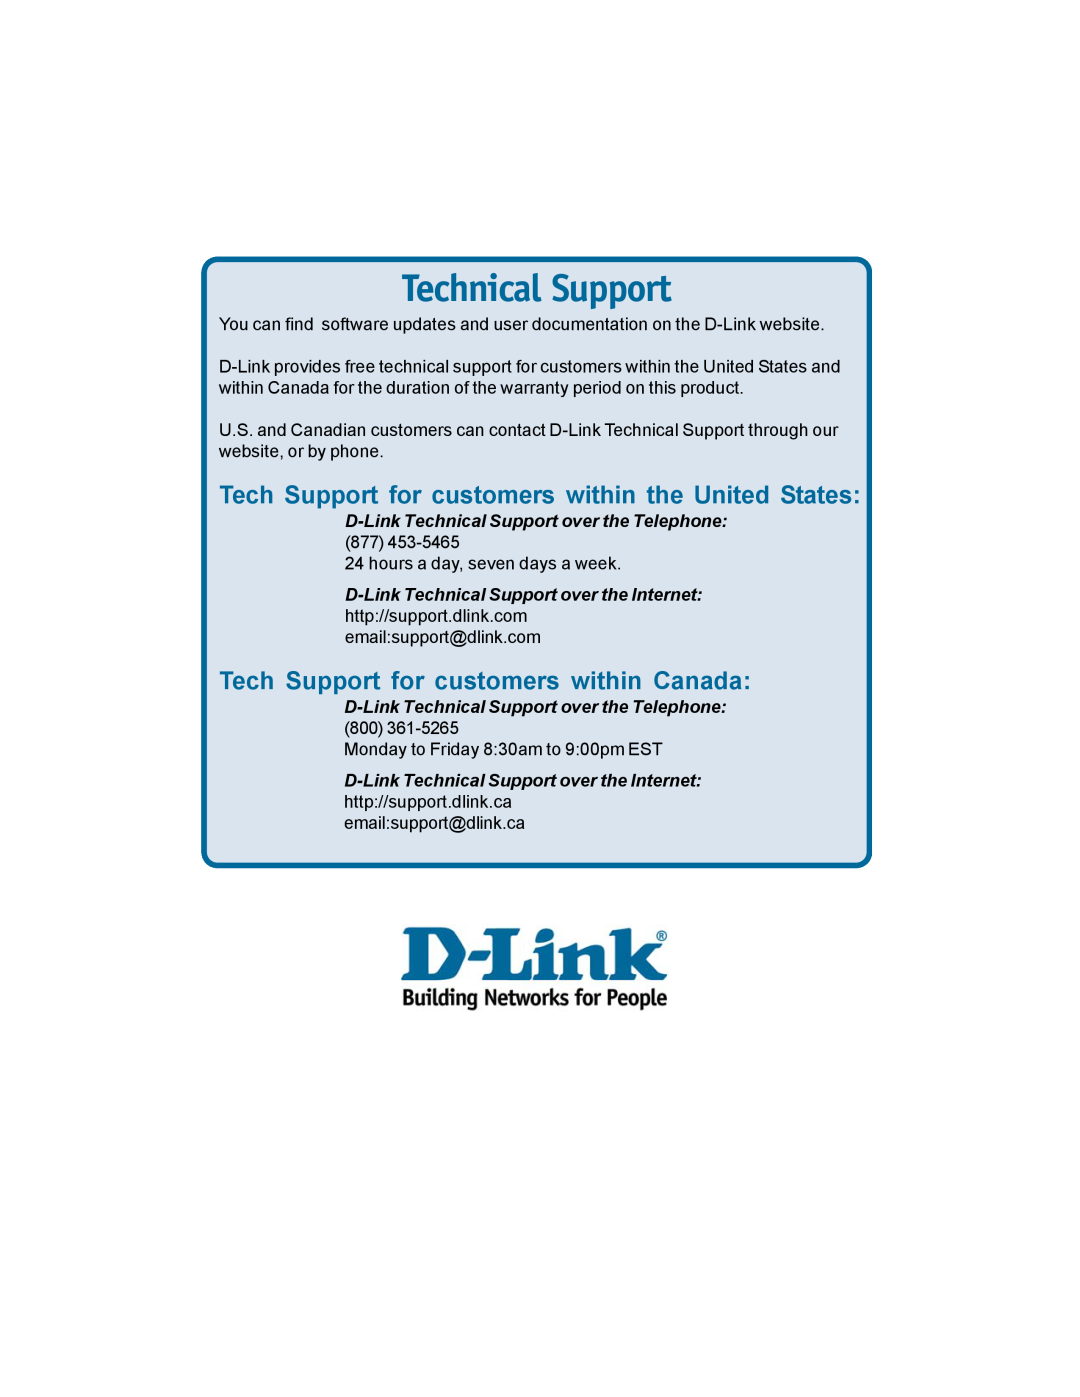 D-Link dkvm-2k specifications Tech Support for customers within the United States, Tech Support for customers within Canada 